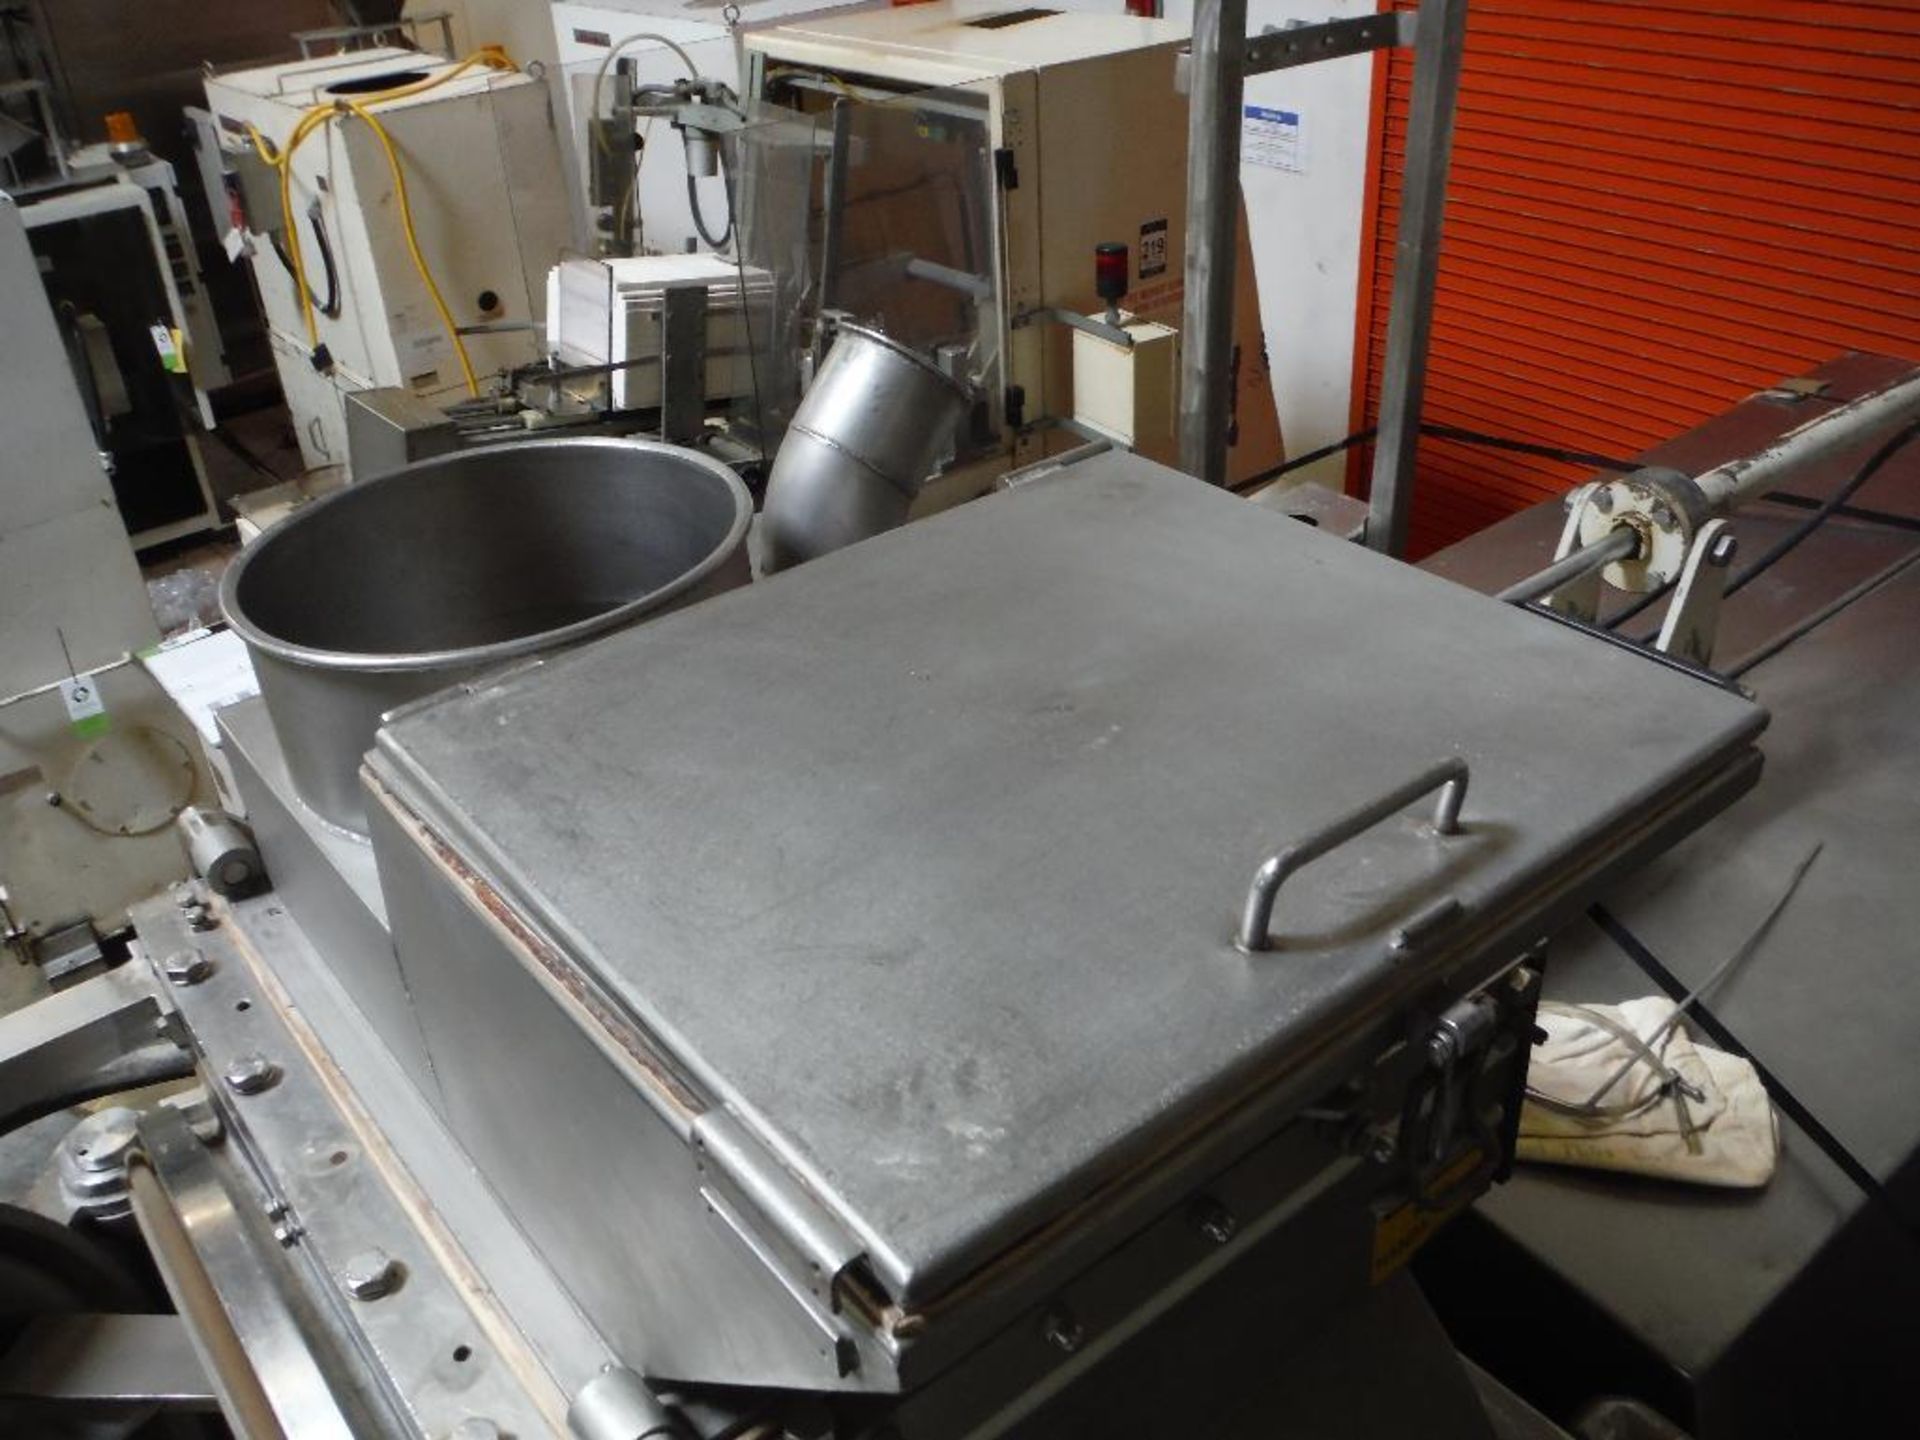 Stephan high speed jacketed mixer, Model TK_600, SN 714583, 43 in. bowl diameter x 26 in. deep, with - Image 11 of 29